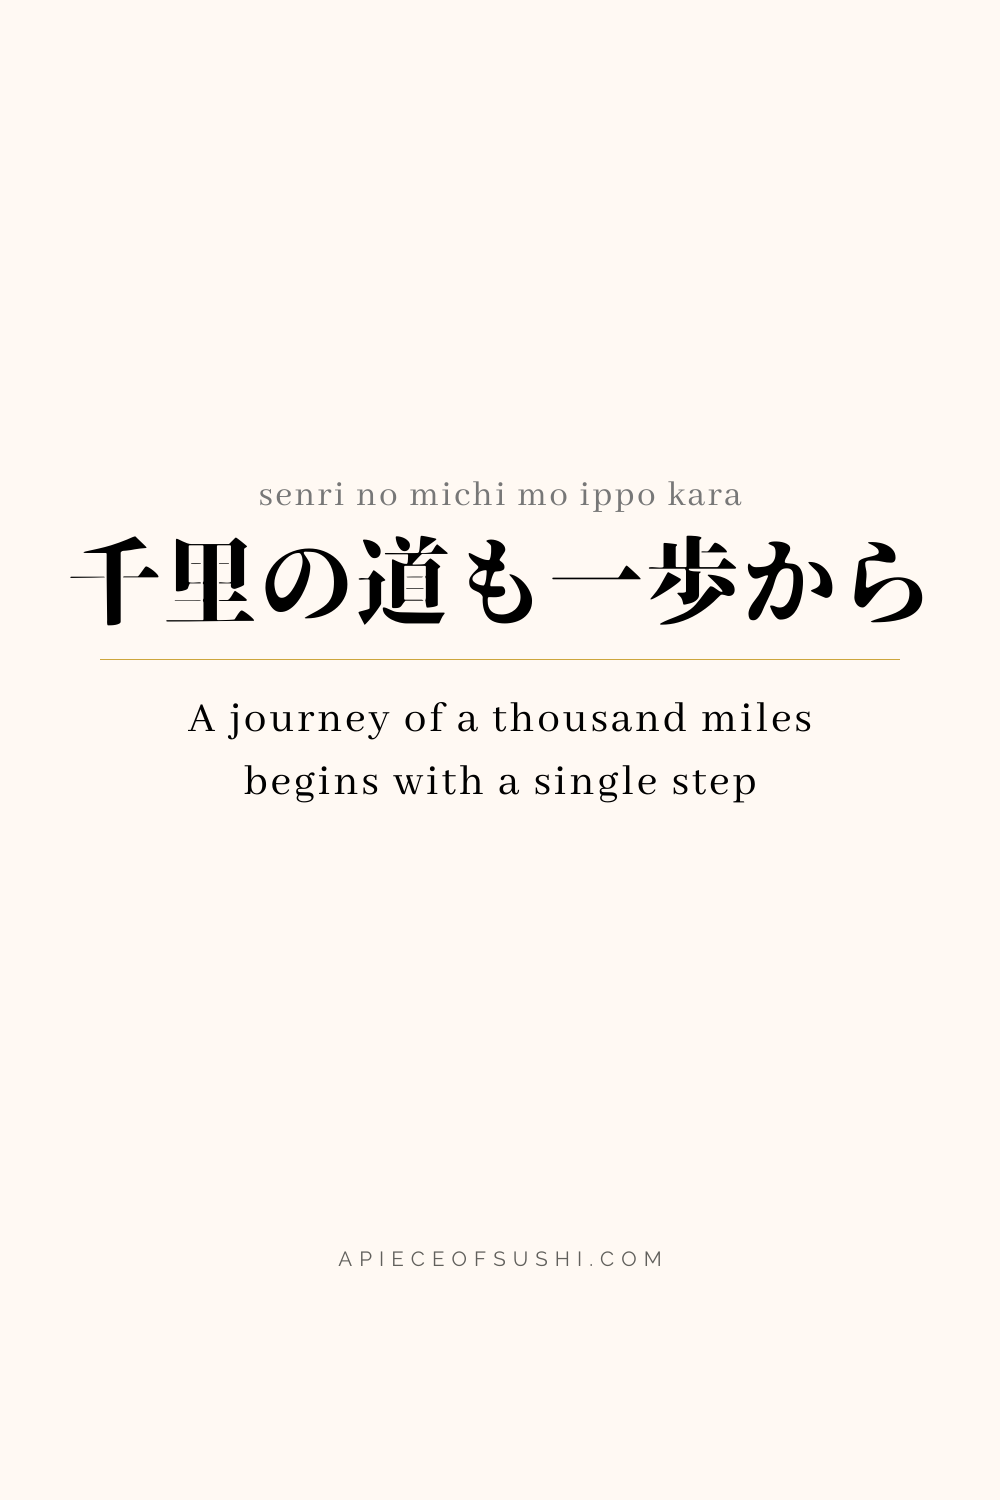 Japanese Proverb 1 Senri No Michi Mo Ippo Kara A Journey Of A Thousand Miles Begins With A Single Step 千里の道も一歩から A Piece Of Sushi